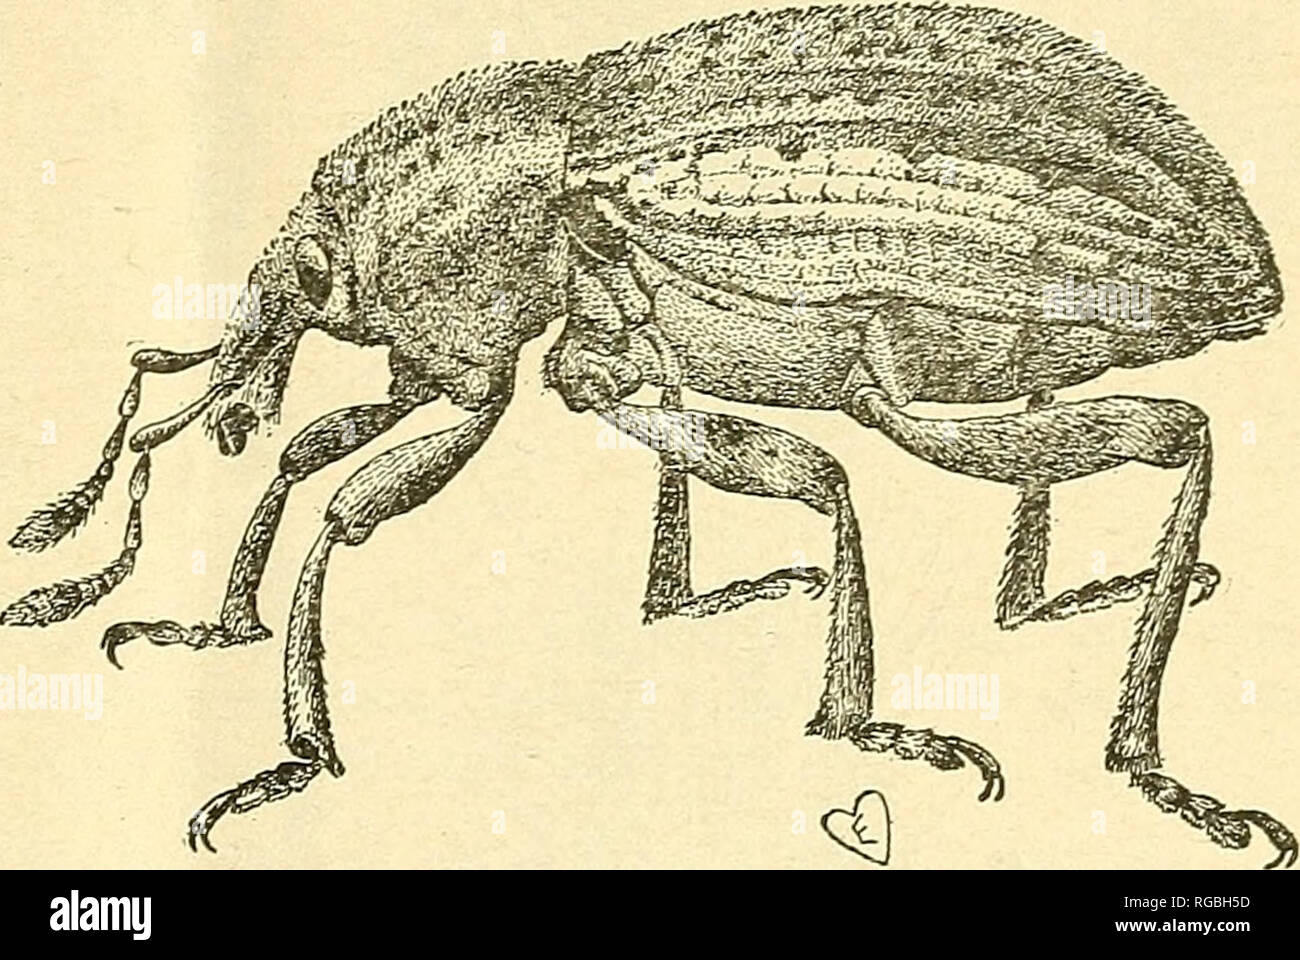 . Bulletin of the U.S. Department of Agriculture. Agriculture; Agriculture. CLOVER-LEAF WEEVIL. deep, punctured; antennae reddish-black, scape reaching to middle of eyes, not as long as funicle, not greatly enlarged at tip; first joint of funicle distinctly longer than second, enlarged at the apex so that it is about one-half as thick as long, second joint equal to three and four united, joints three to seven regularly shorter and broader, seven as wide as long, club elongate-oval, pointed at the tip, antennae with many fine hairs, those on club very fine and dense. Mandibles po.ished, dull re Stock Photo